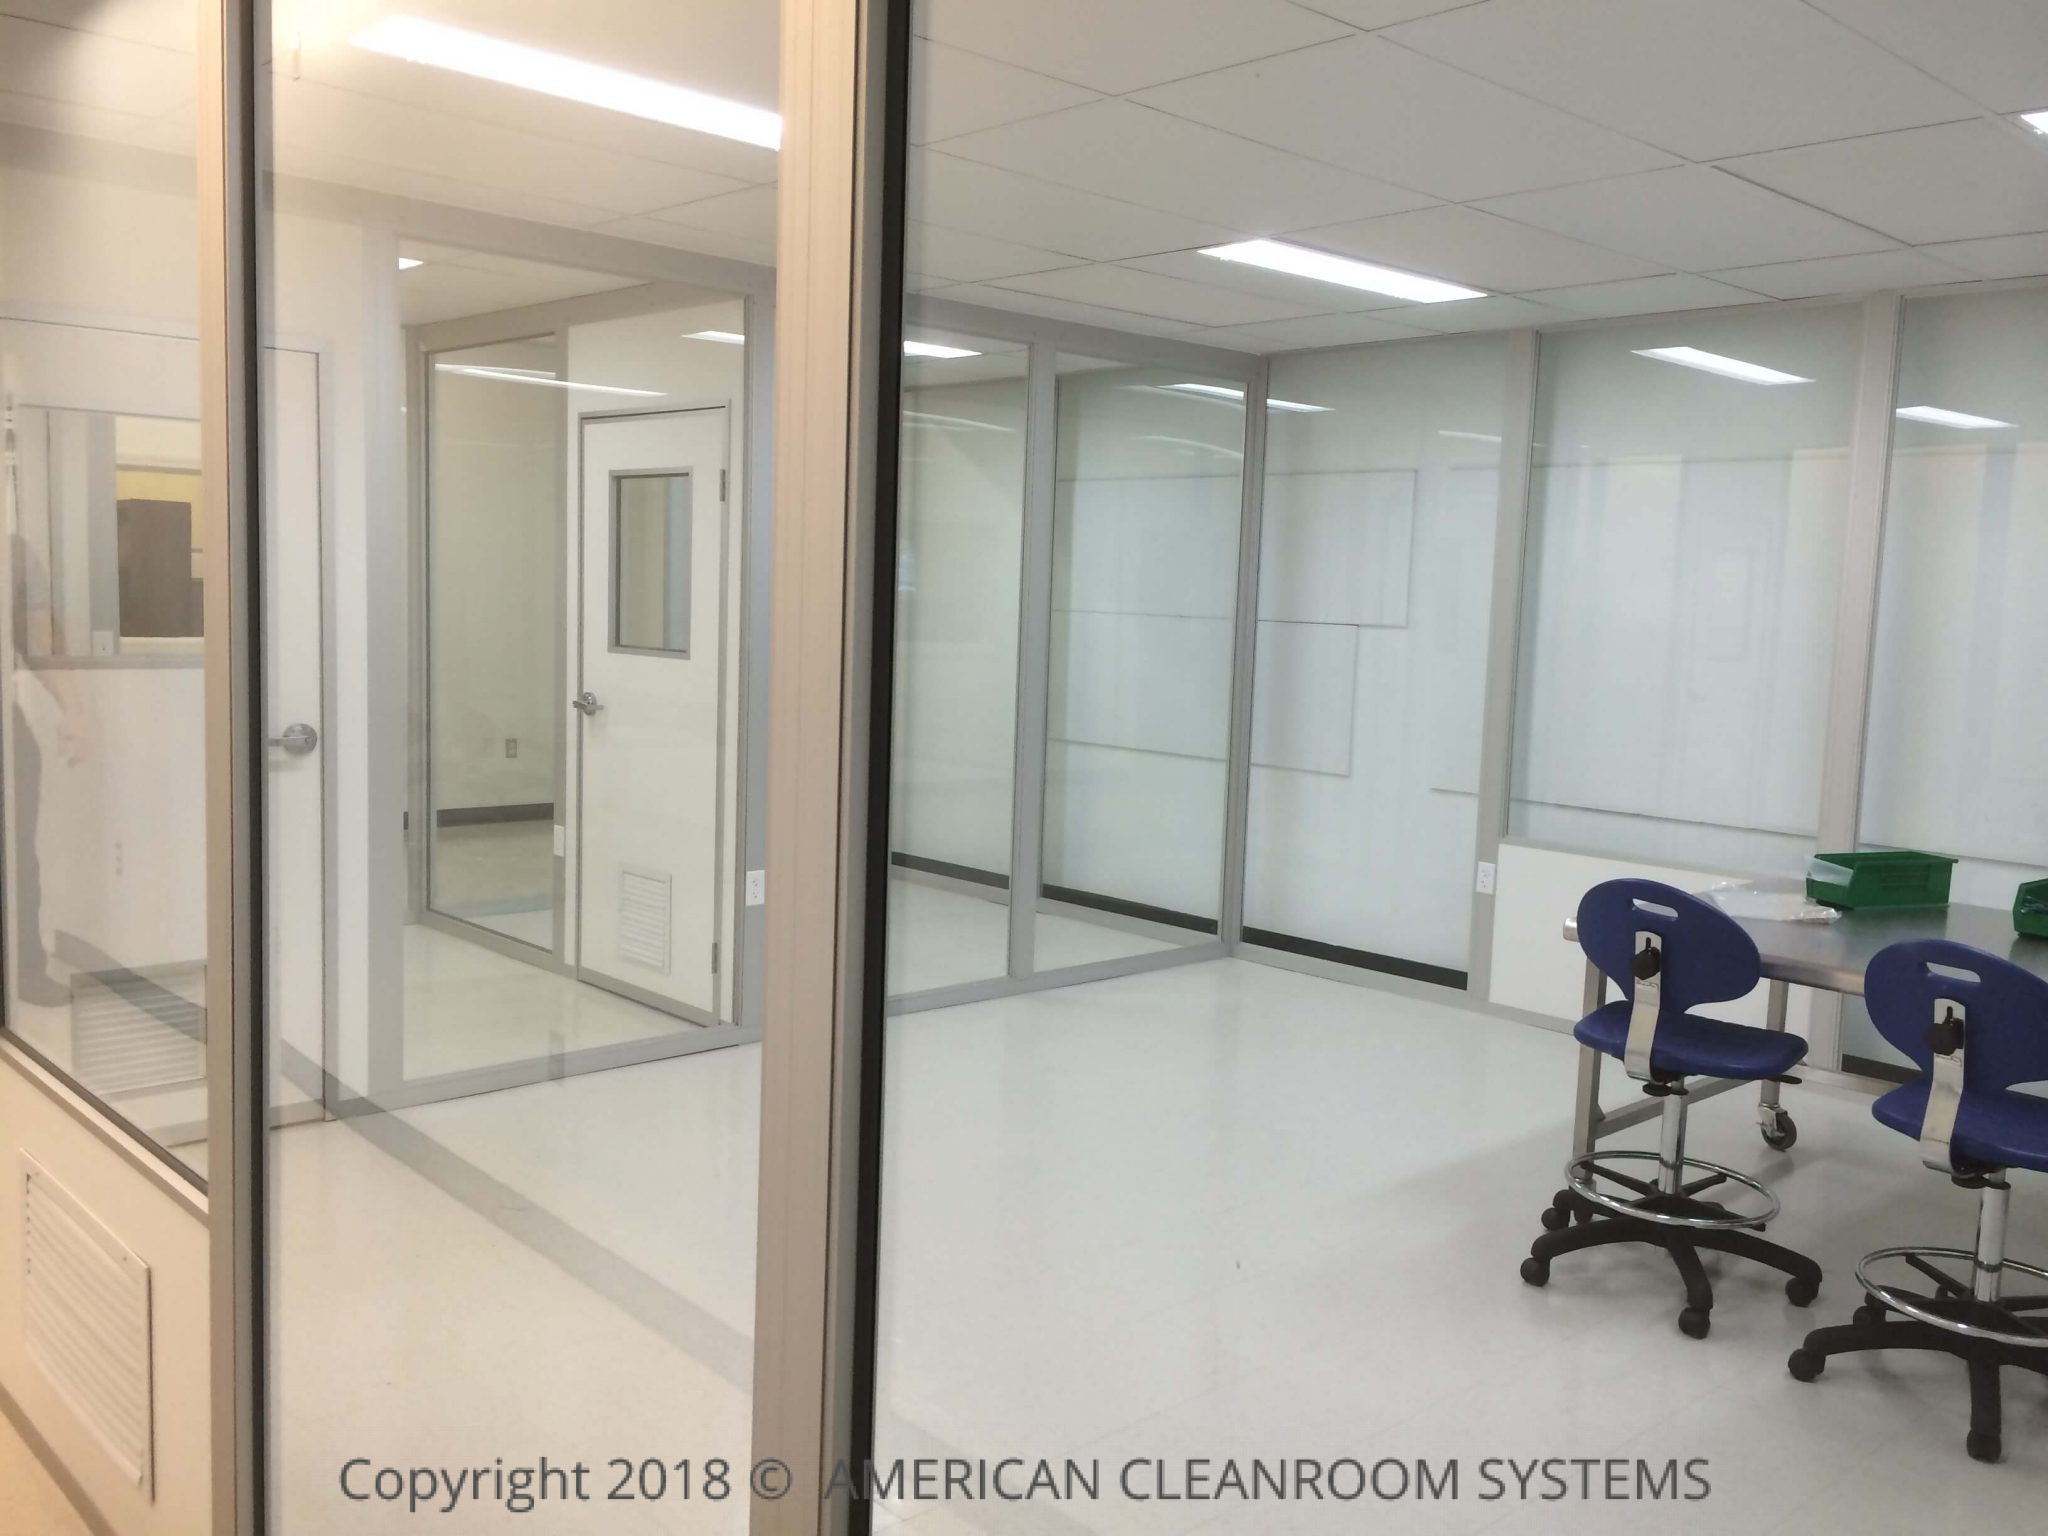 320 Square Foot, Class 10,000, ISO7 Modular Cleanroom